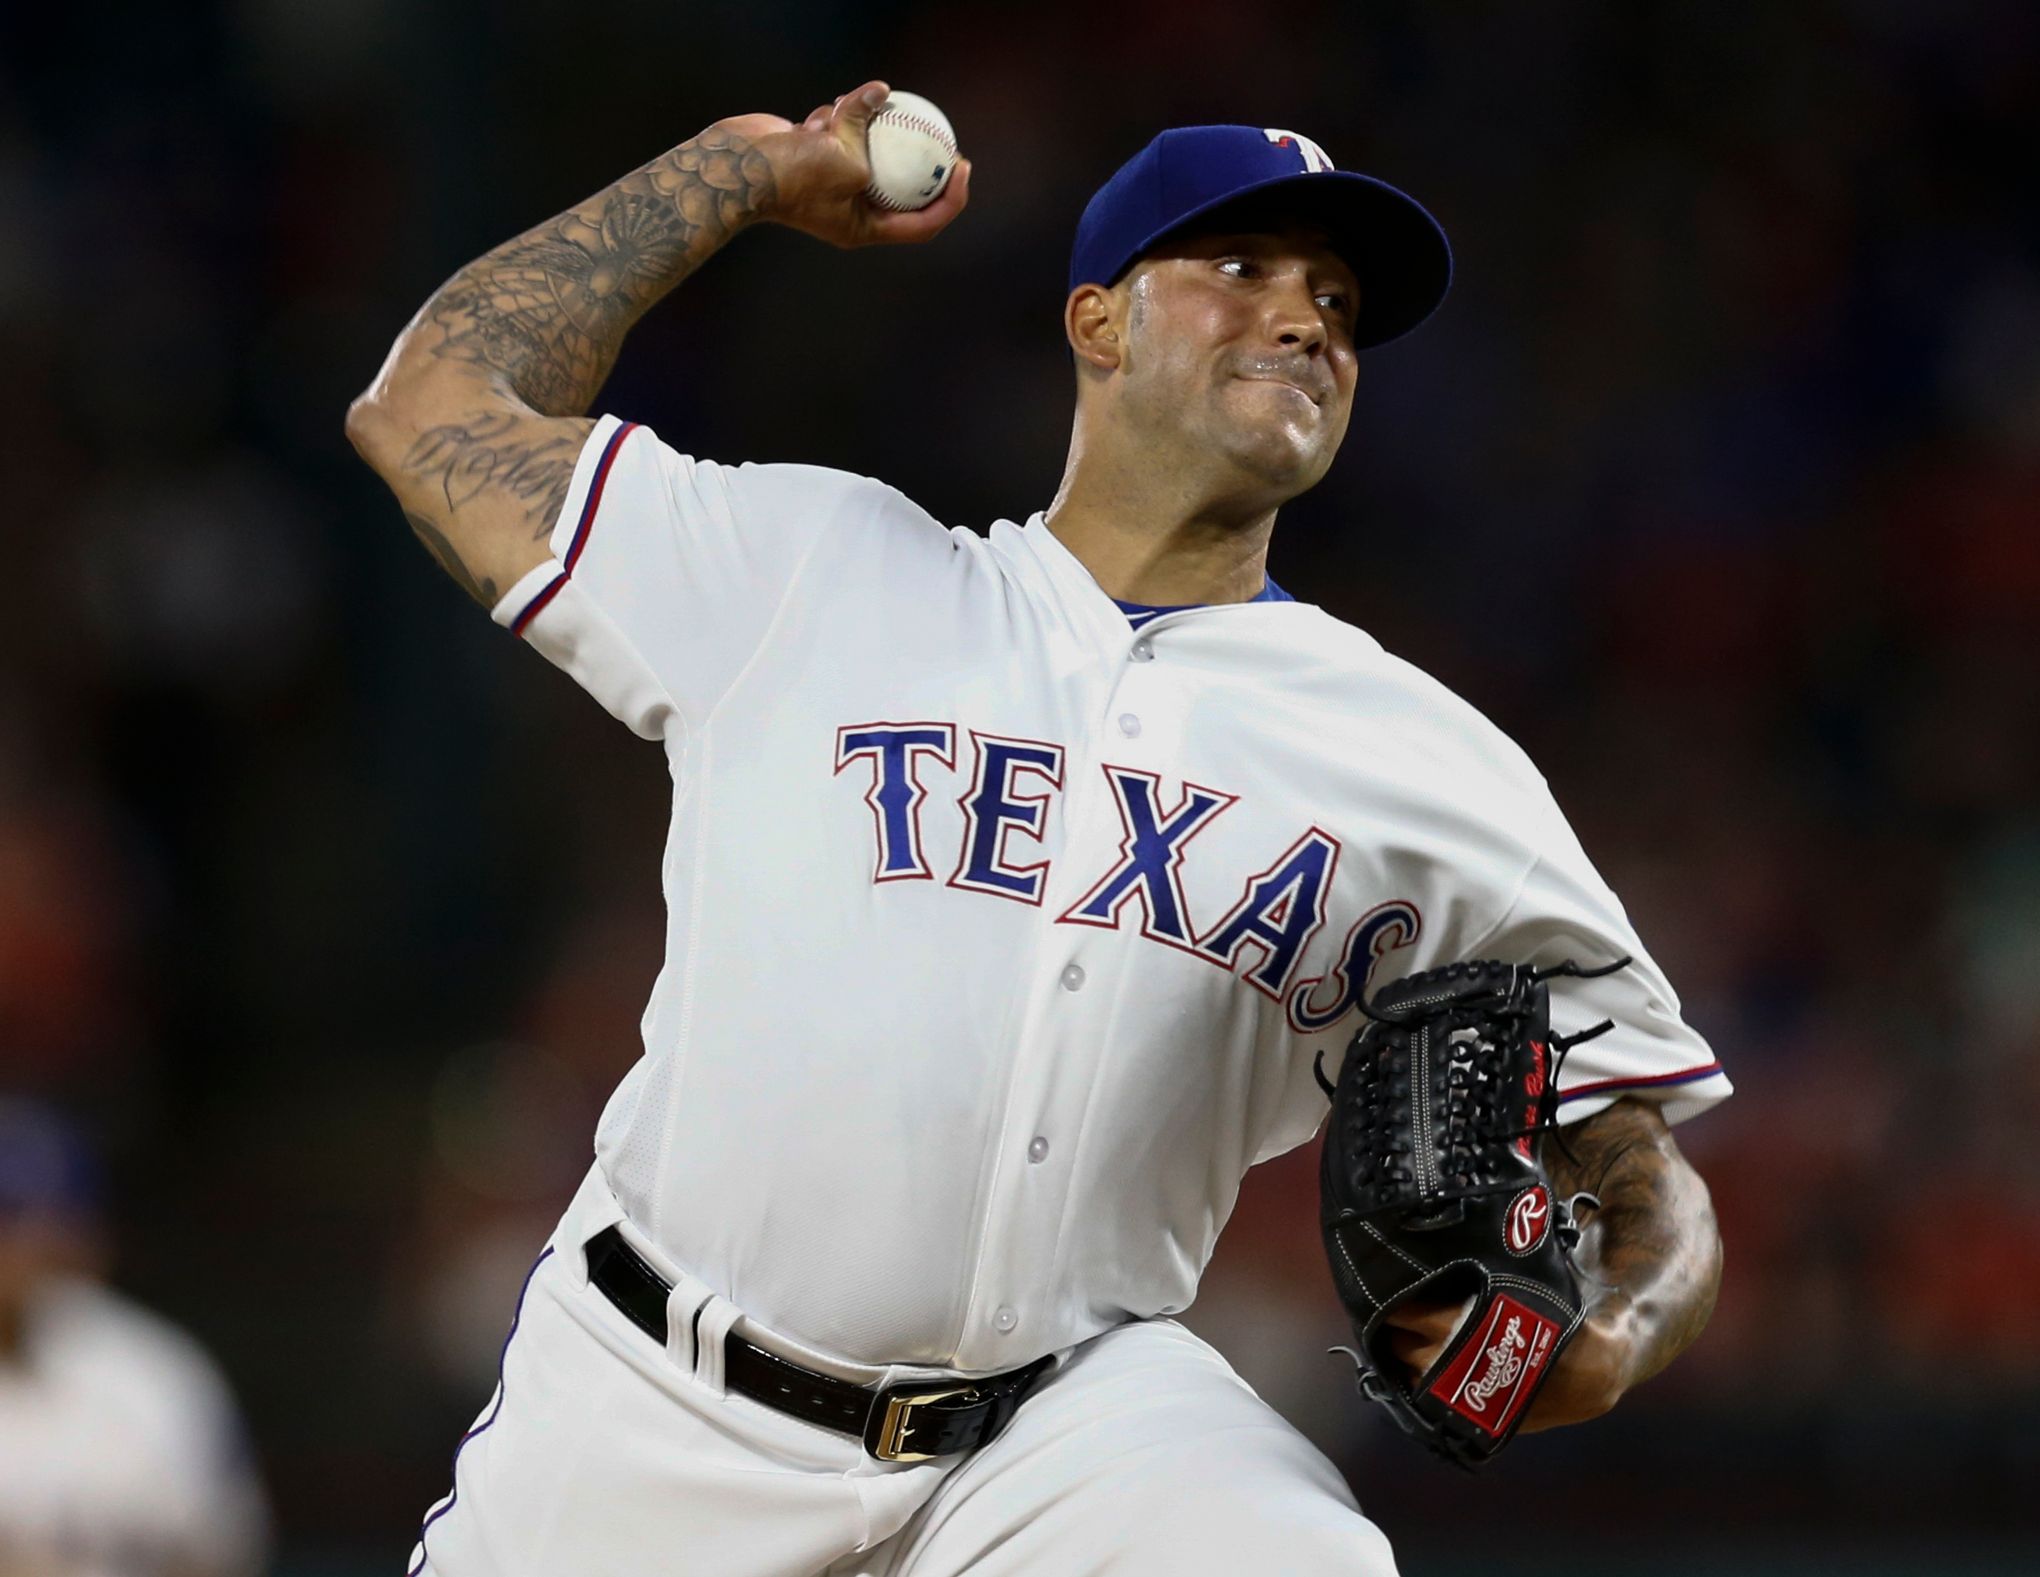 Why slumping Rangers star is staying positive